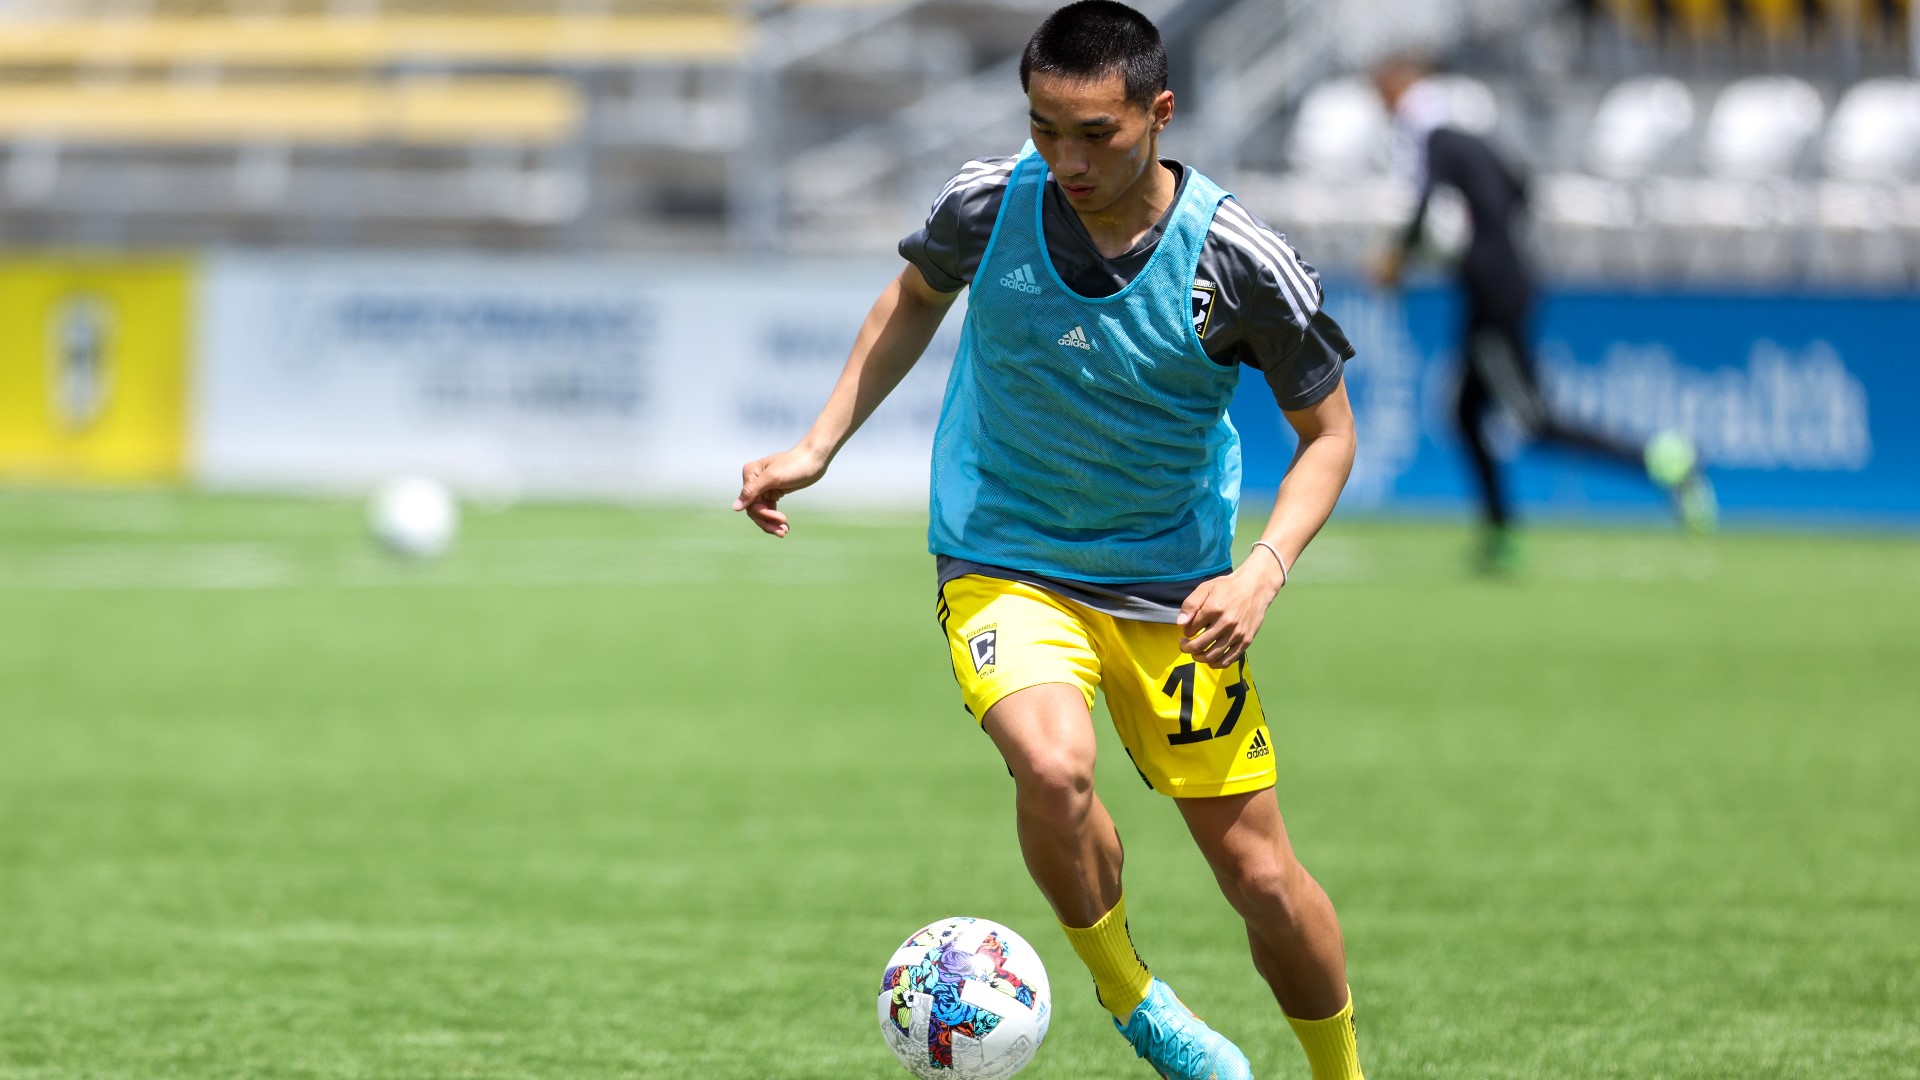 Michael Vang grew up in St. Paul, Minnesota.  He was surrounded by a family who loved soccer, one likely influenced by his father.